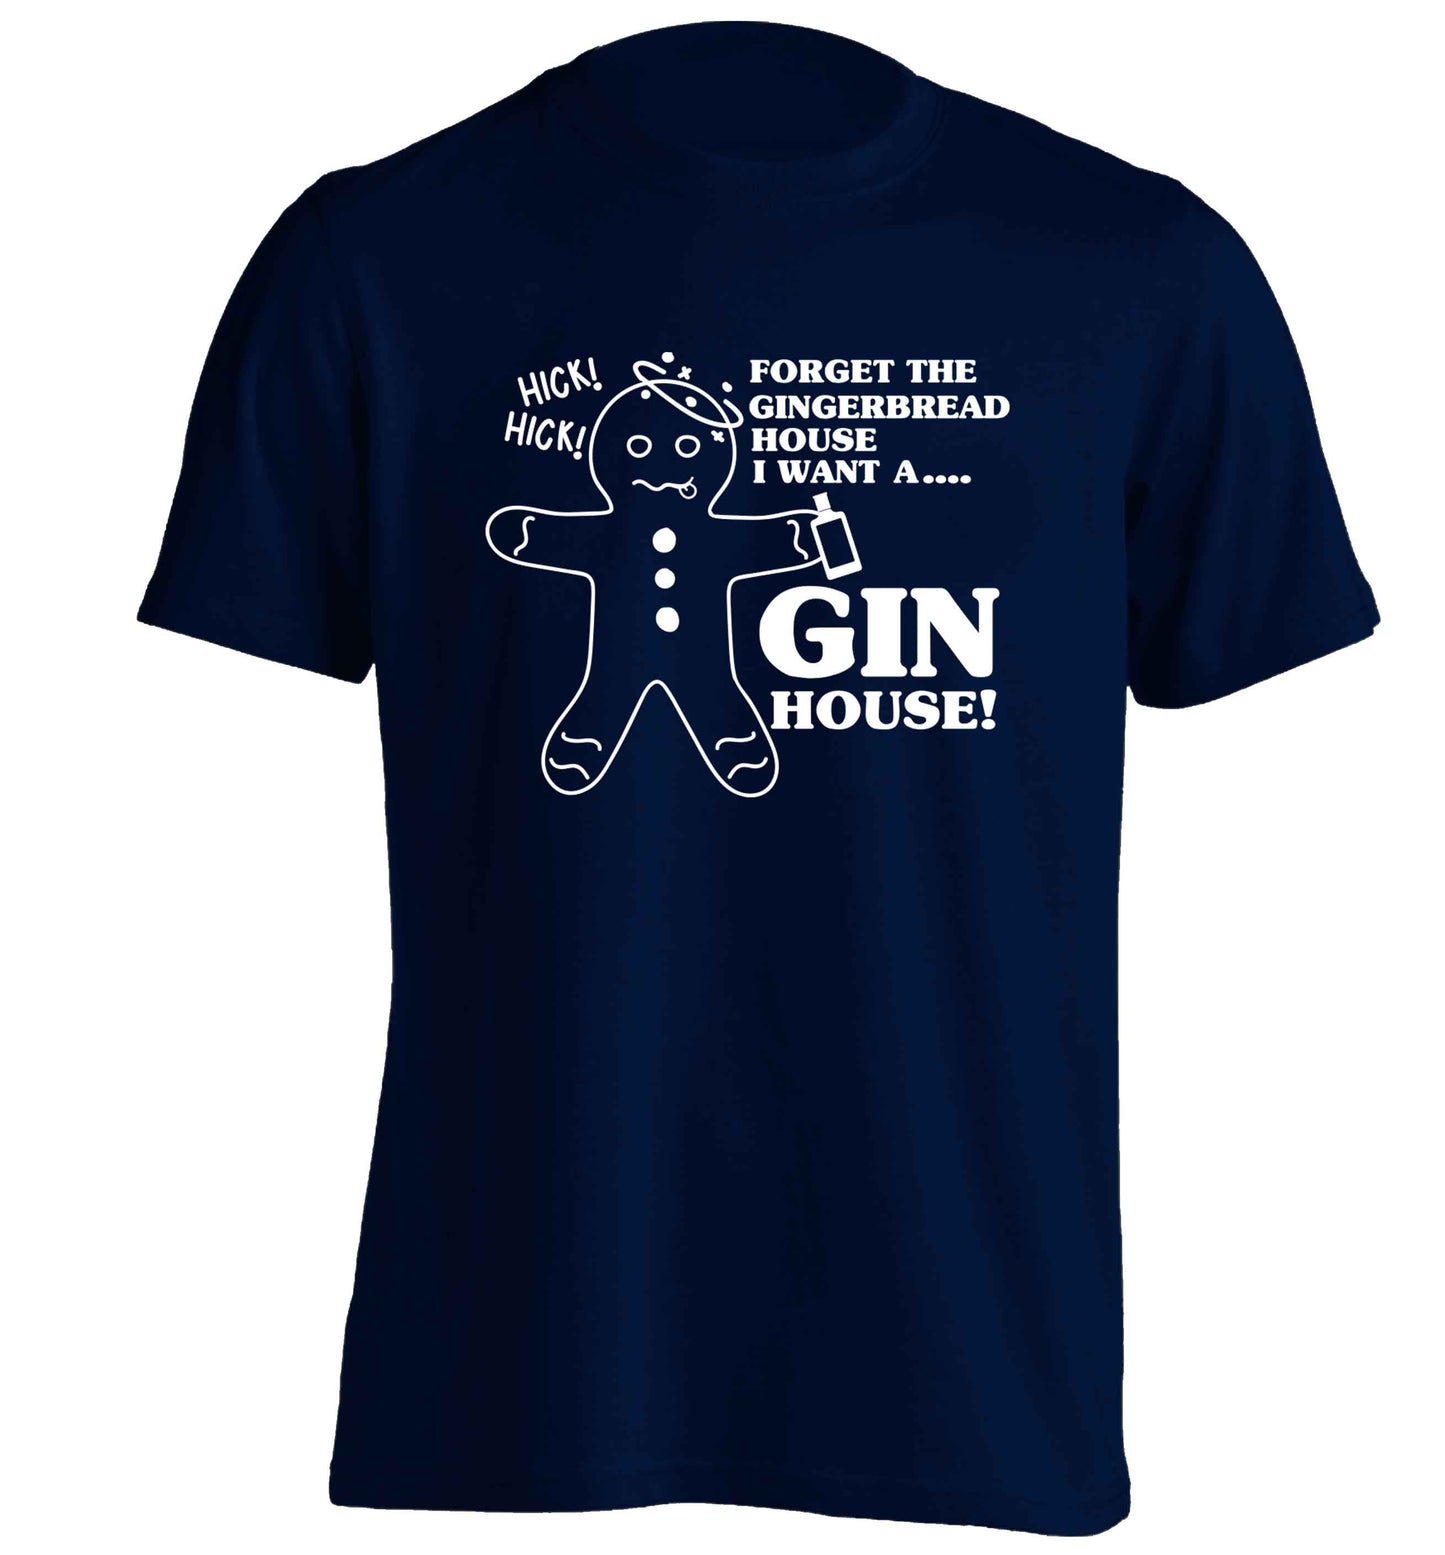 Forget the gingerbread house I want a gin house adults unisex navy Tshirt 2XL